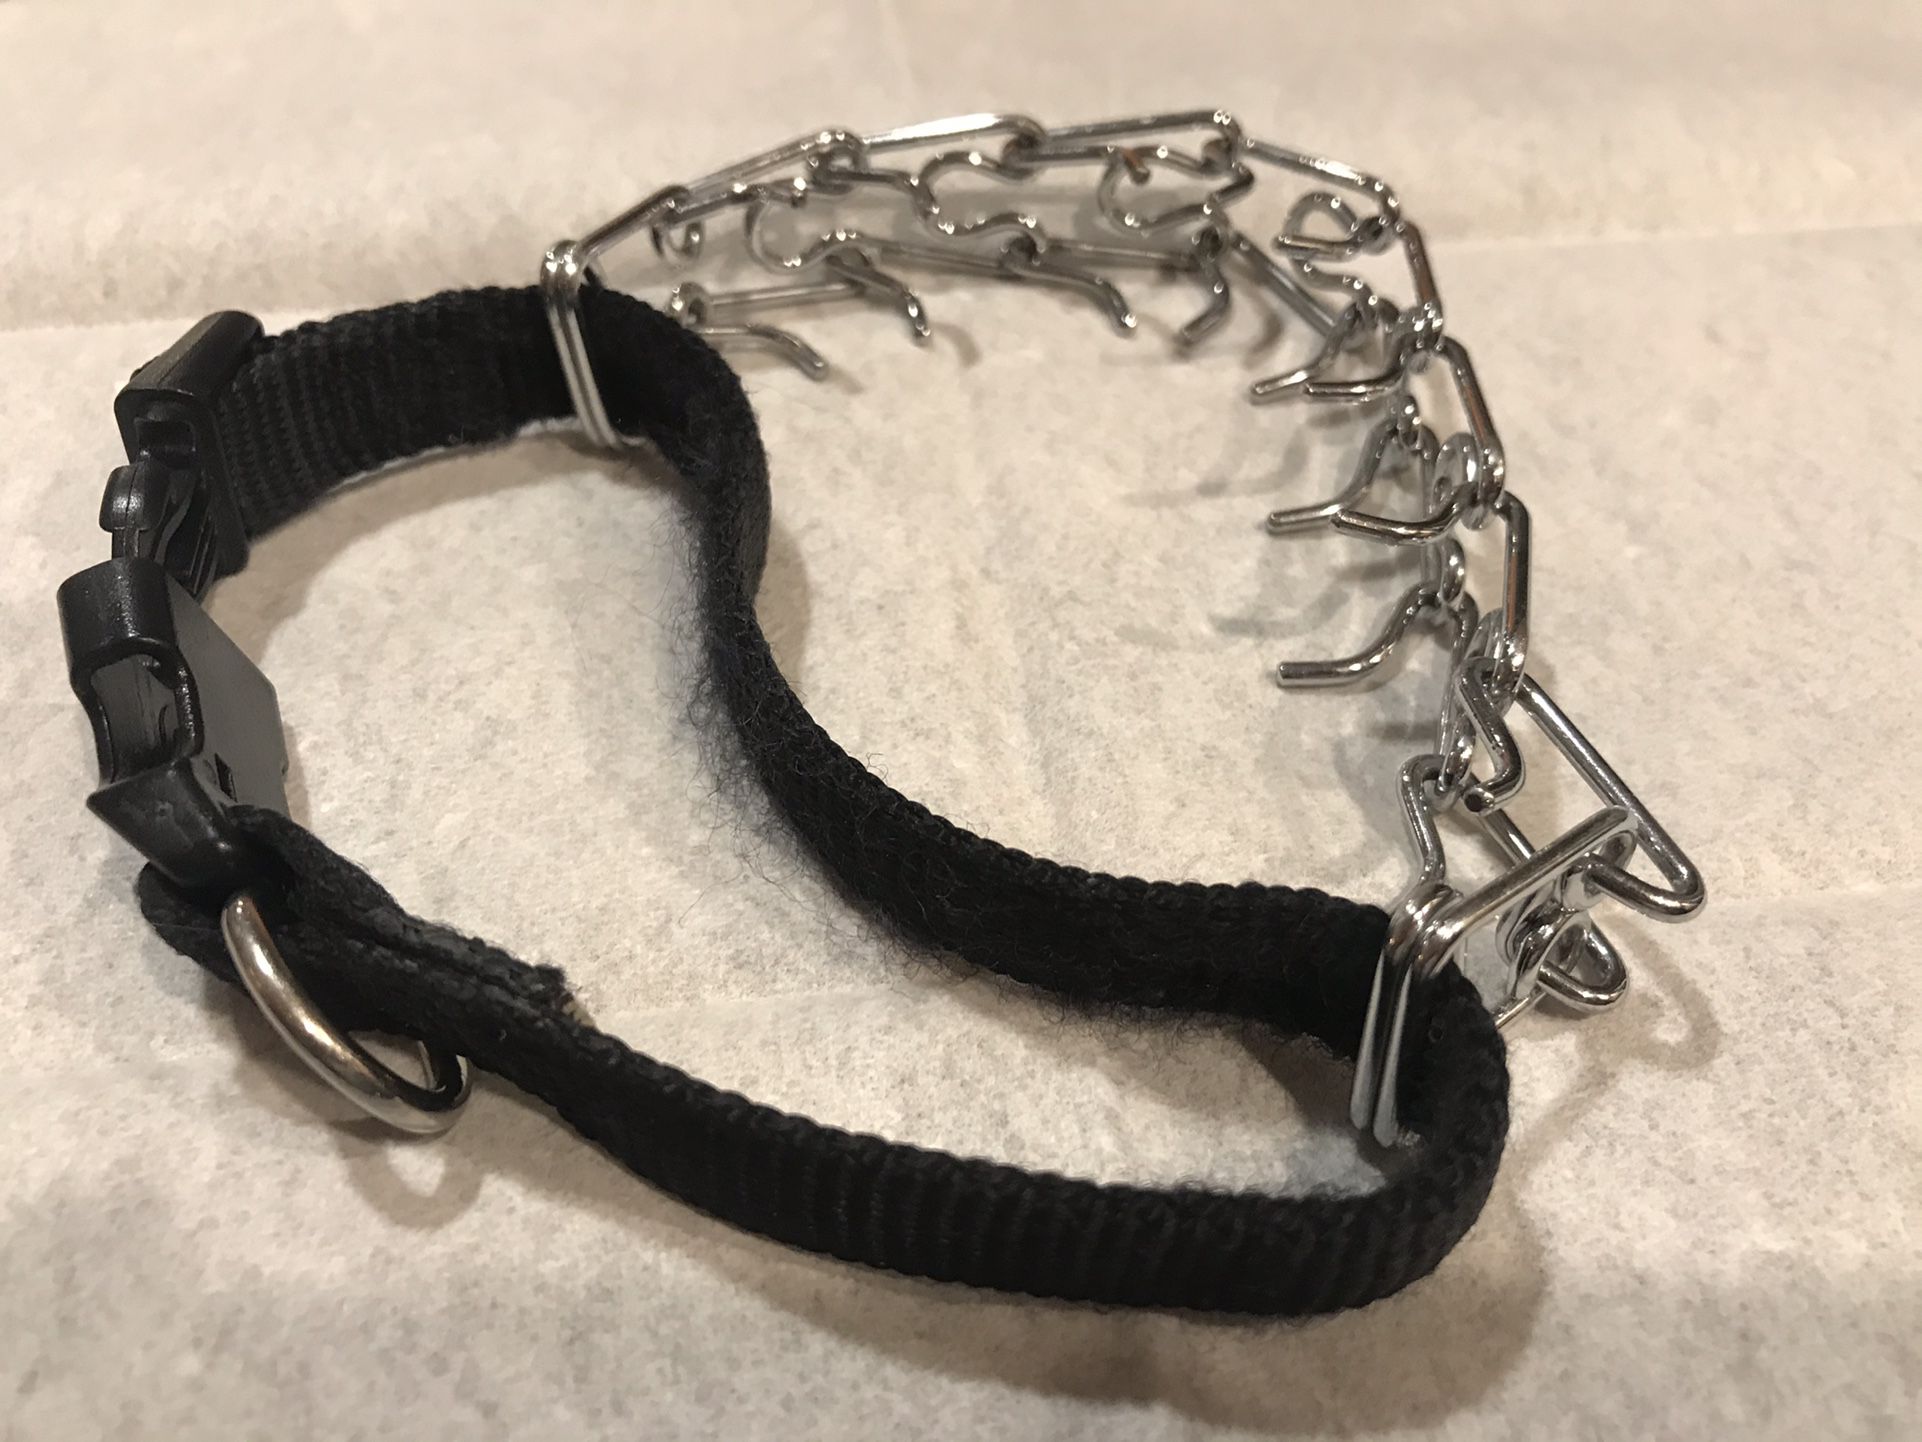 Dog Prong Collar For Training - LIKE NEW CONDITION - for $4.99 or OBO